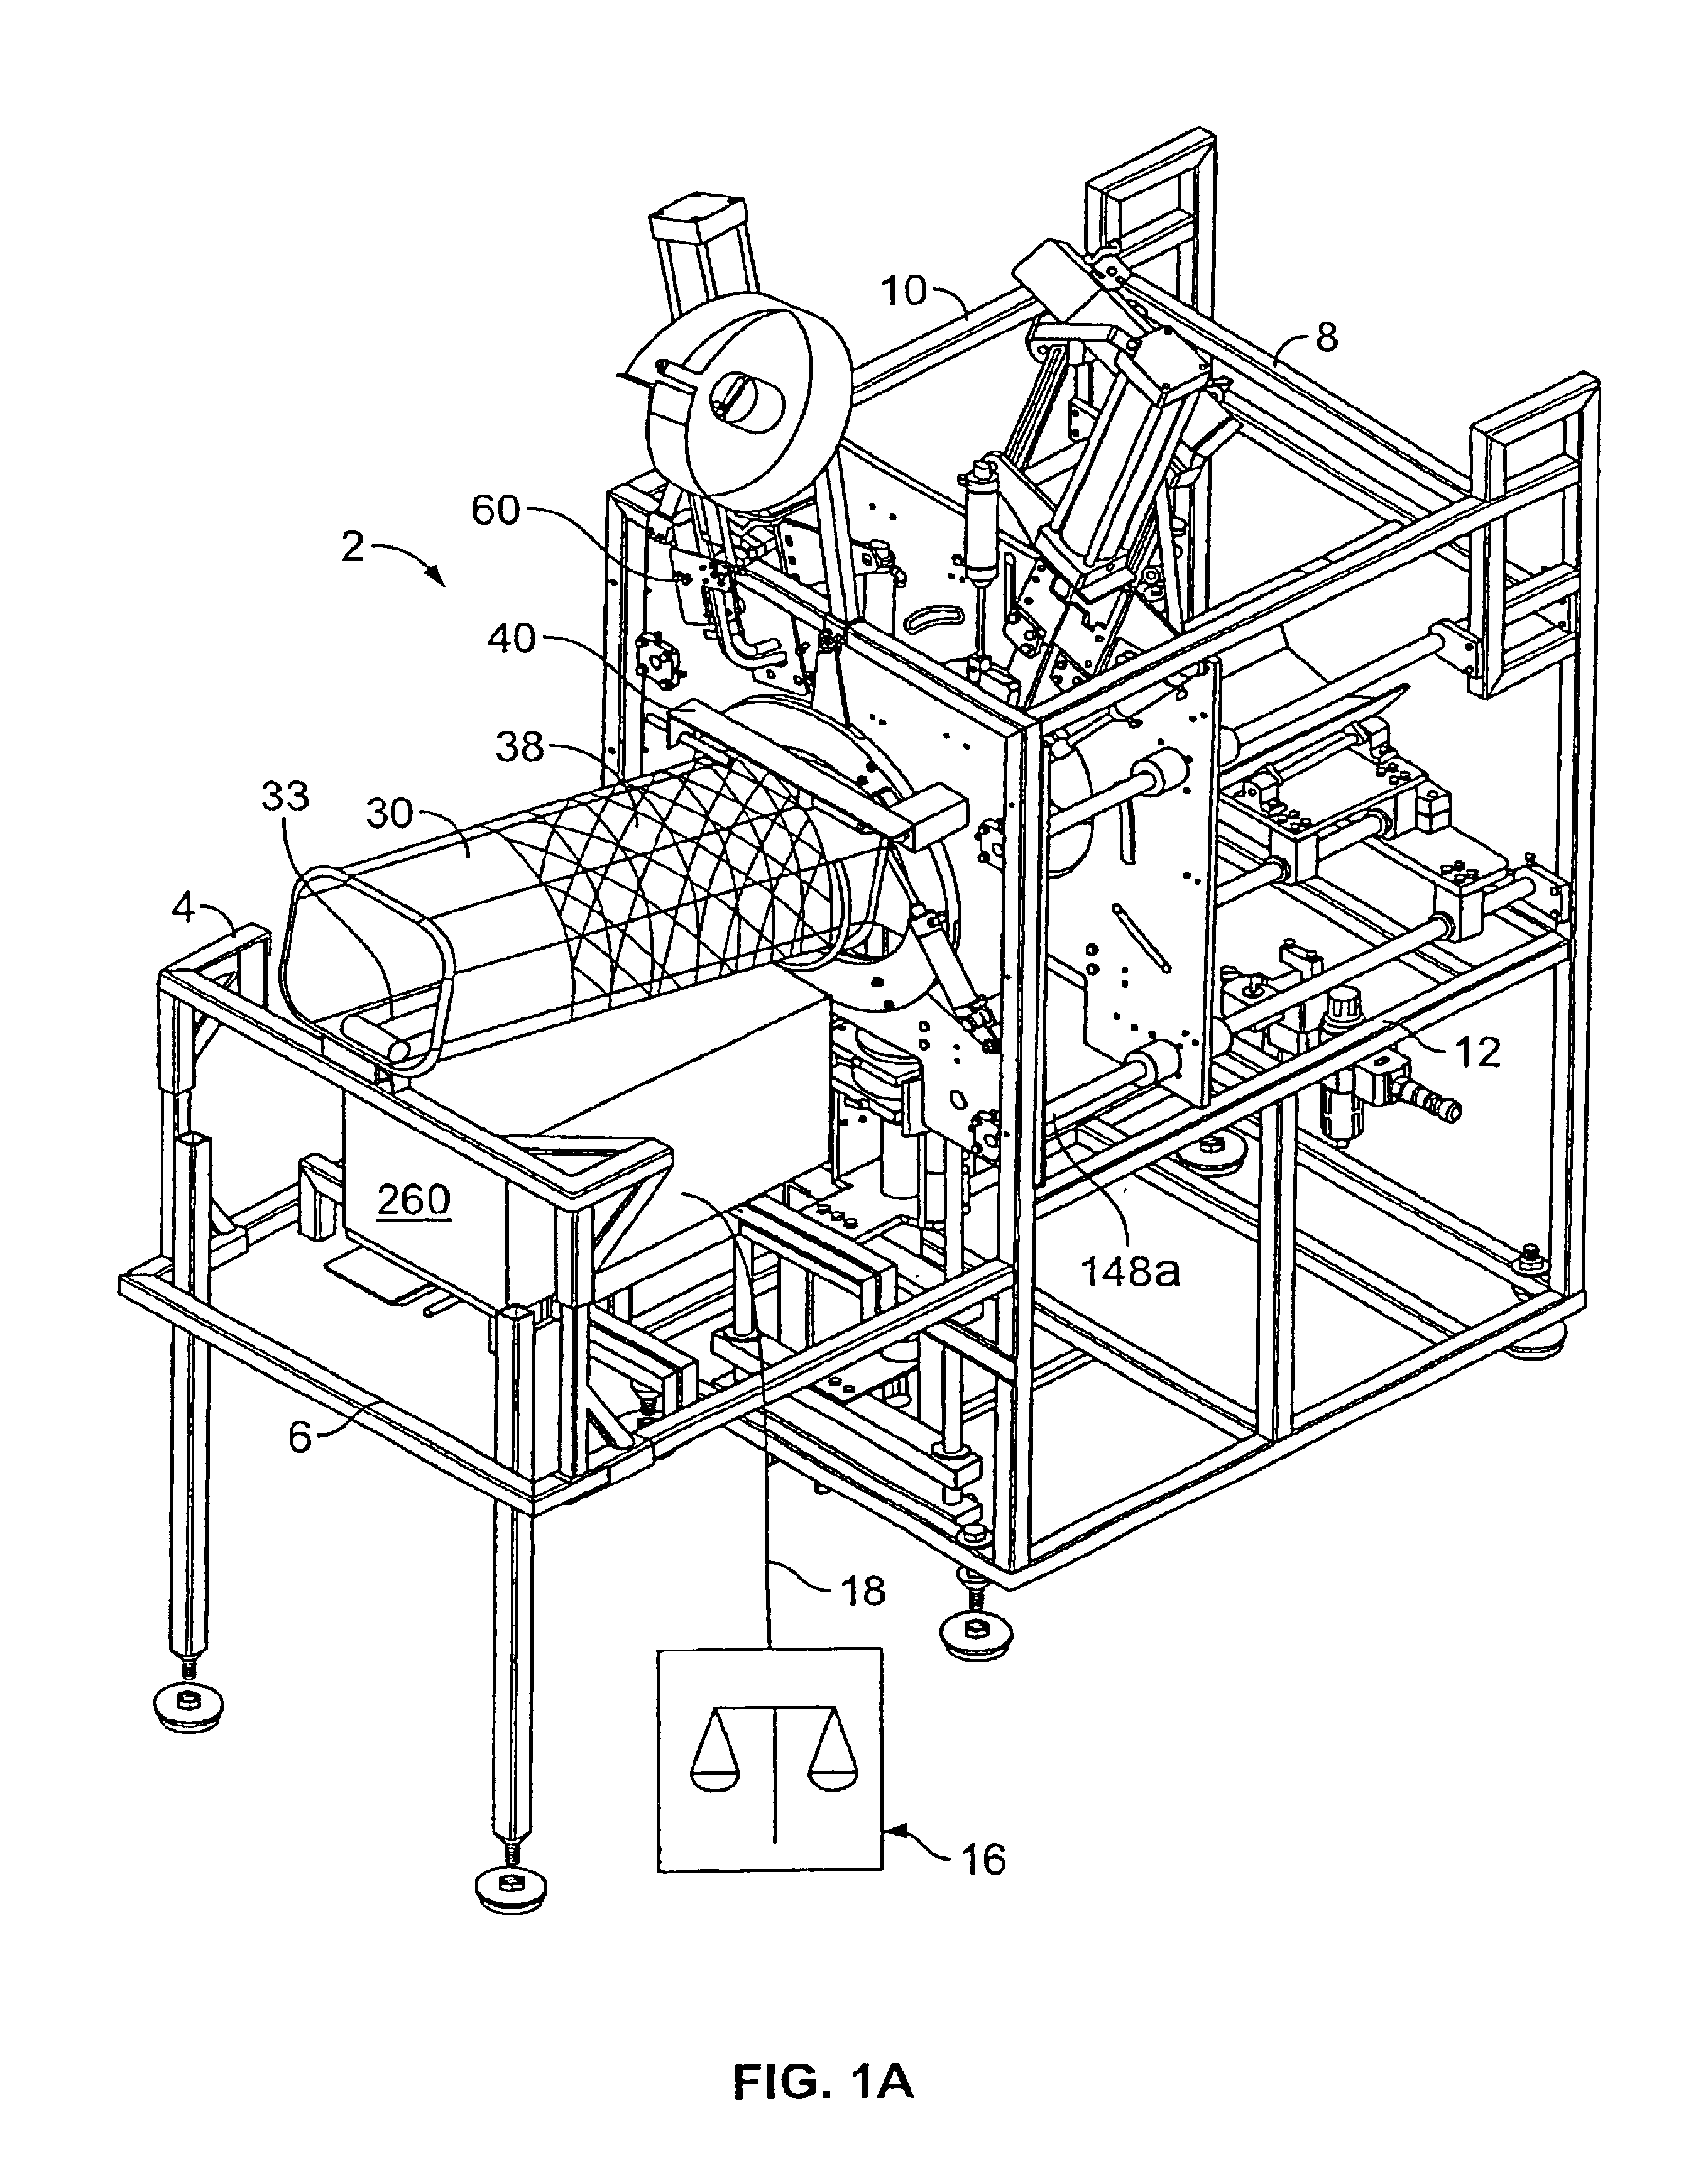 Apparatus for enclosing material in a net